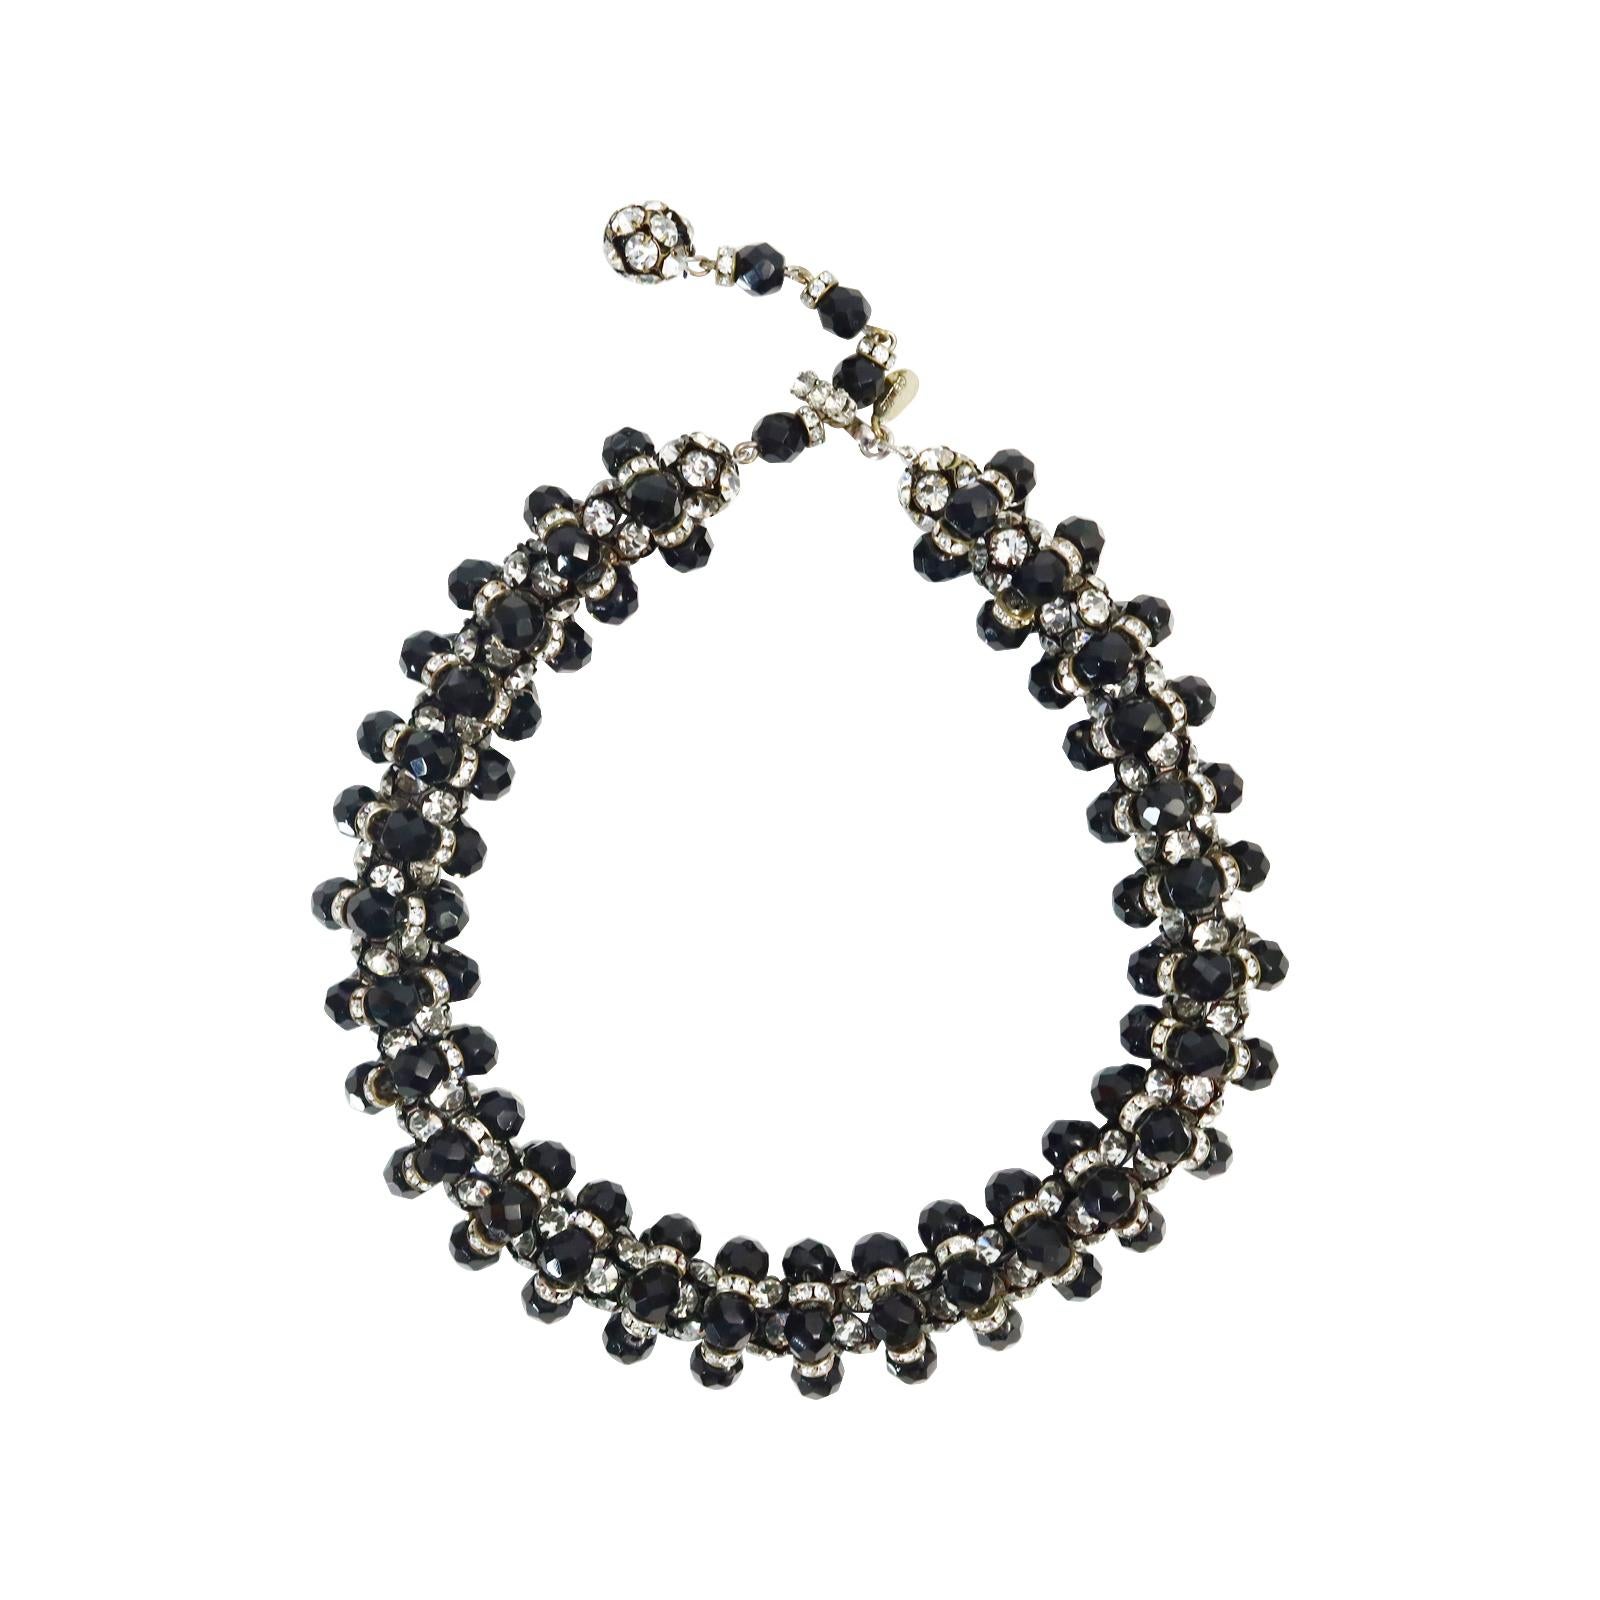 Vintage deLillo Diamante and Black Beaded Choker Necklace Circa 1970s In Excellent Condition For Sale In New York, NY